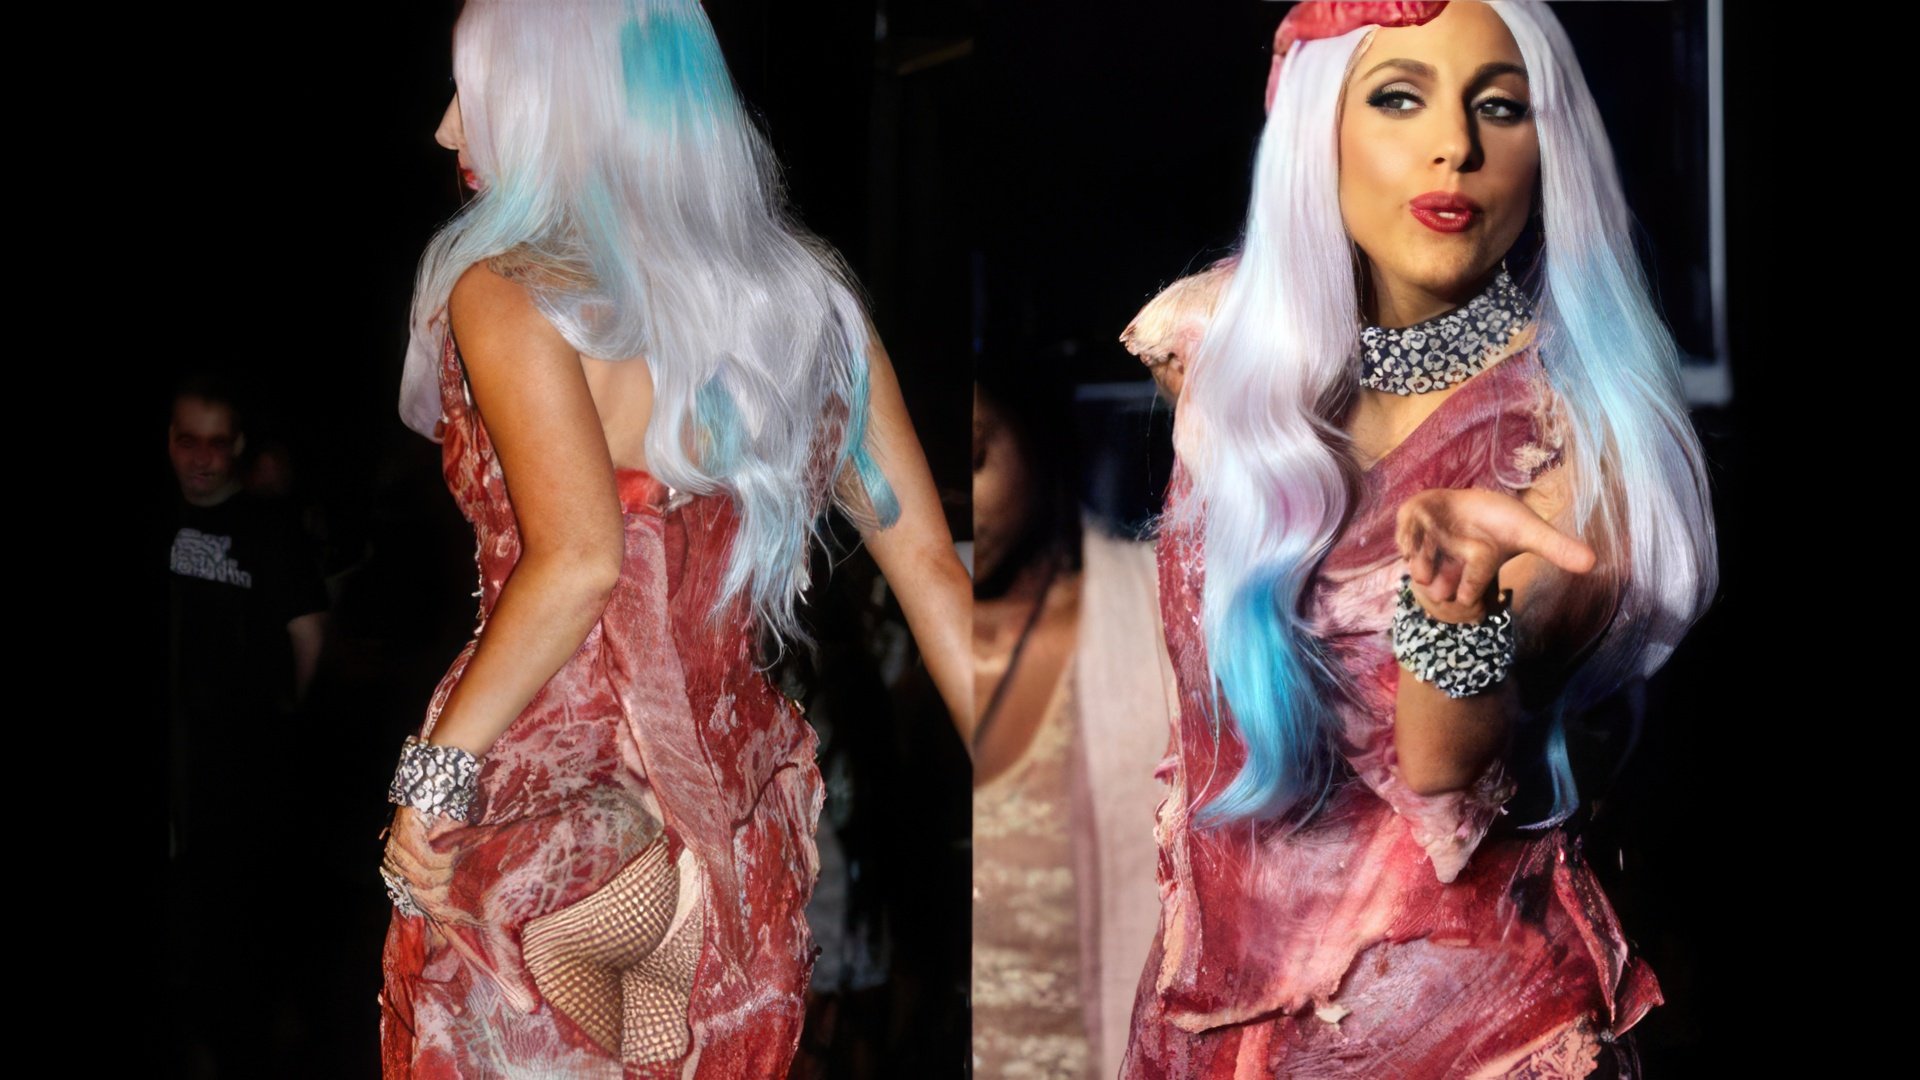 Lady Gaga’s famous meat dress